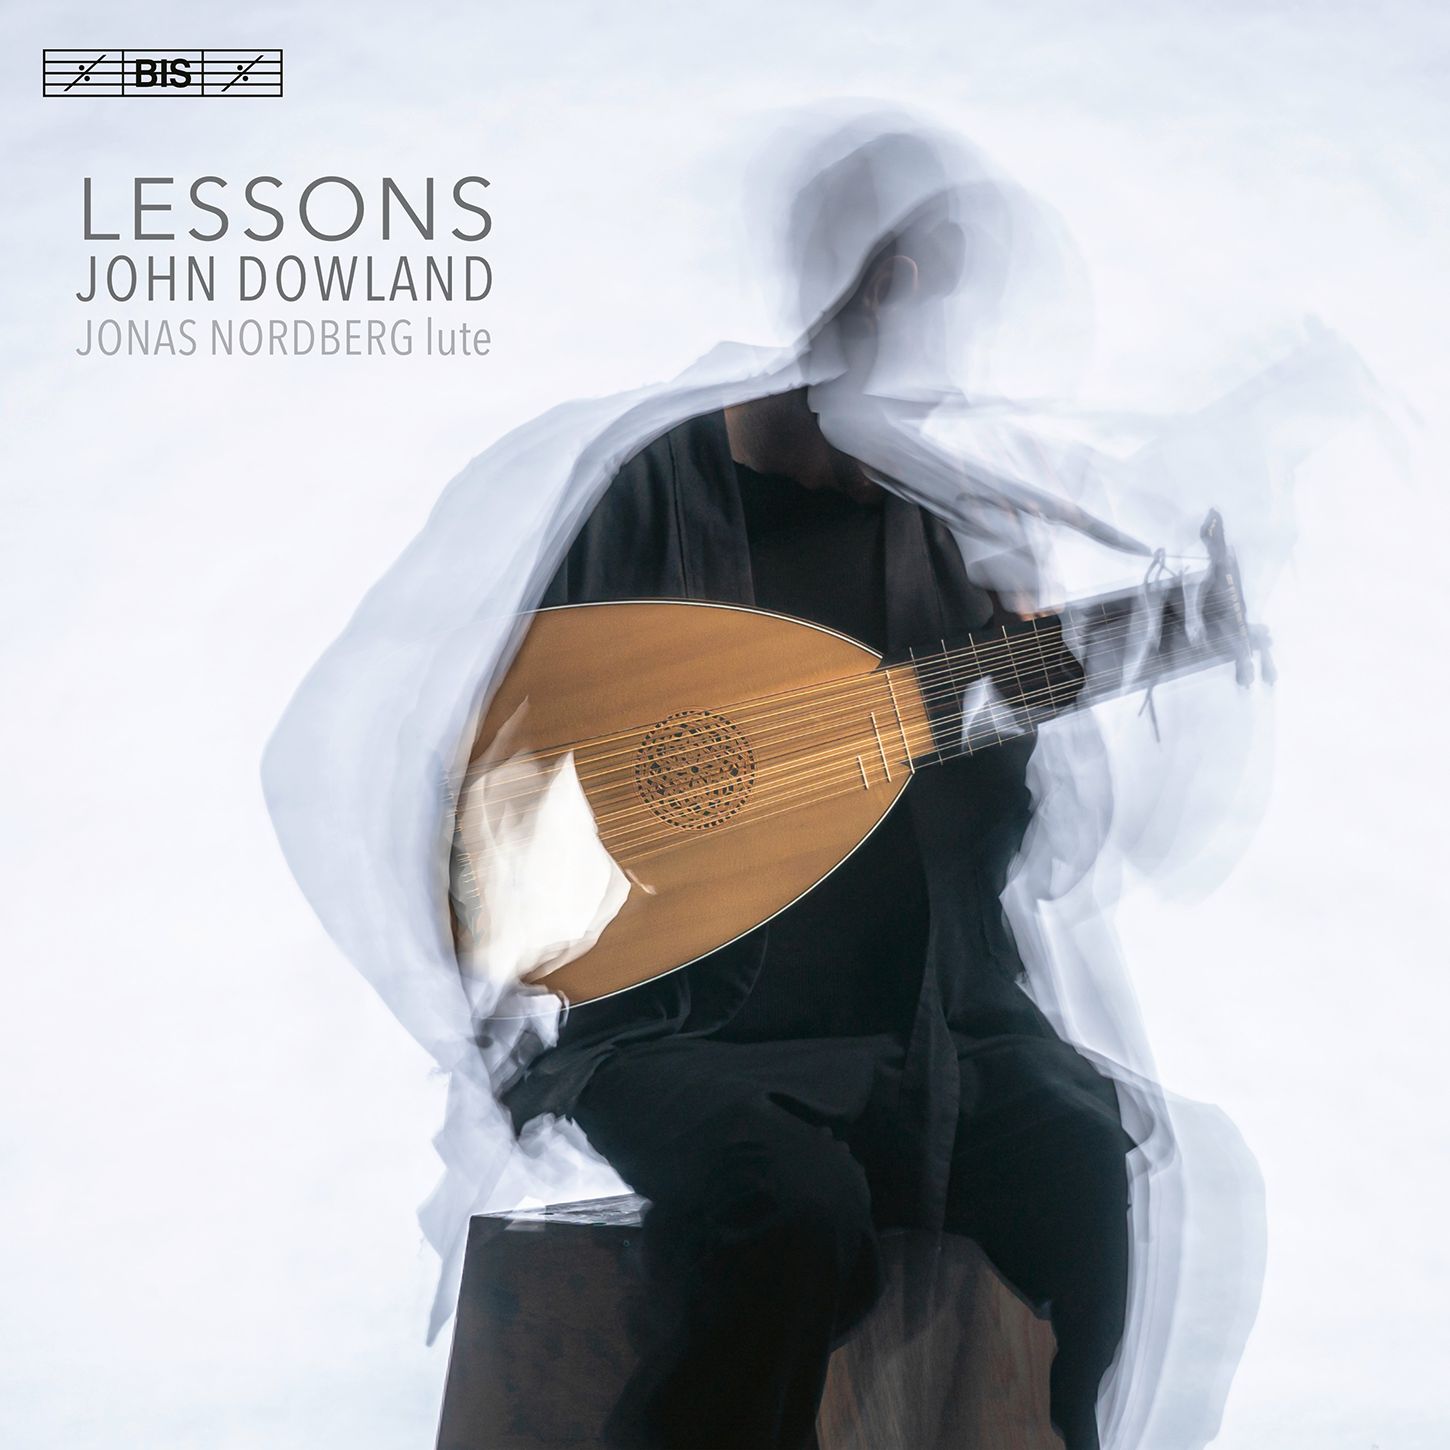 Lessons: John Dowland and the lute